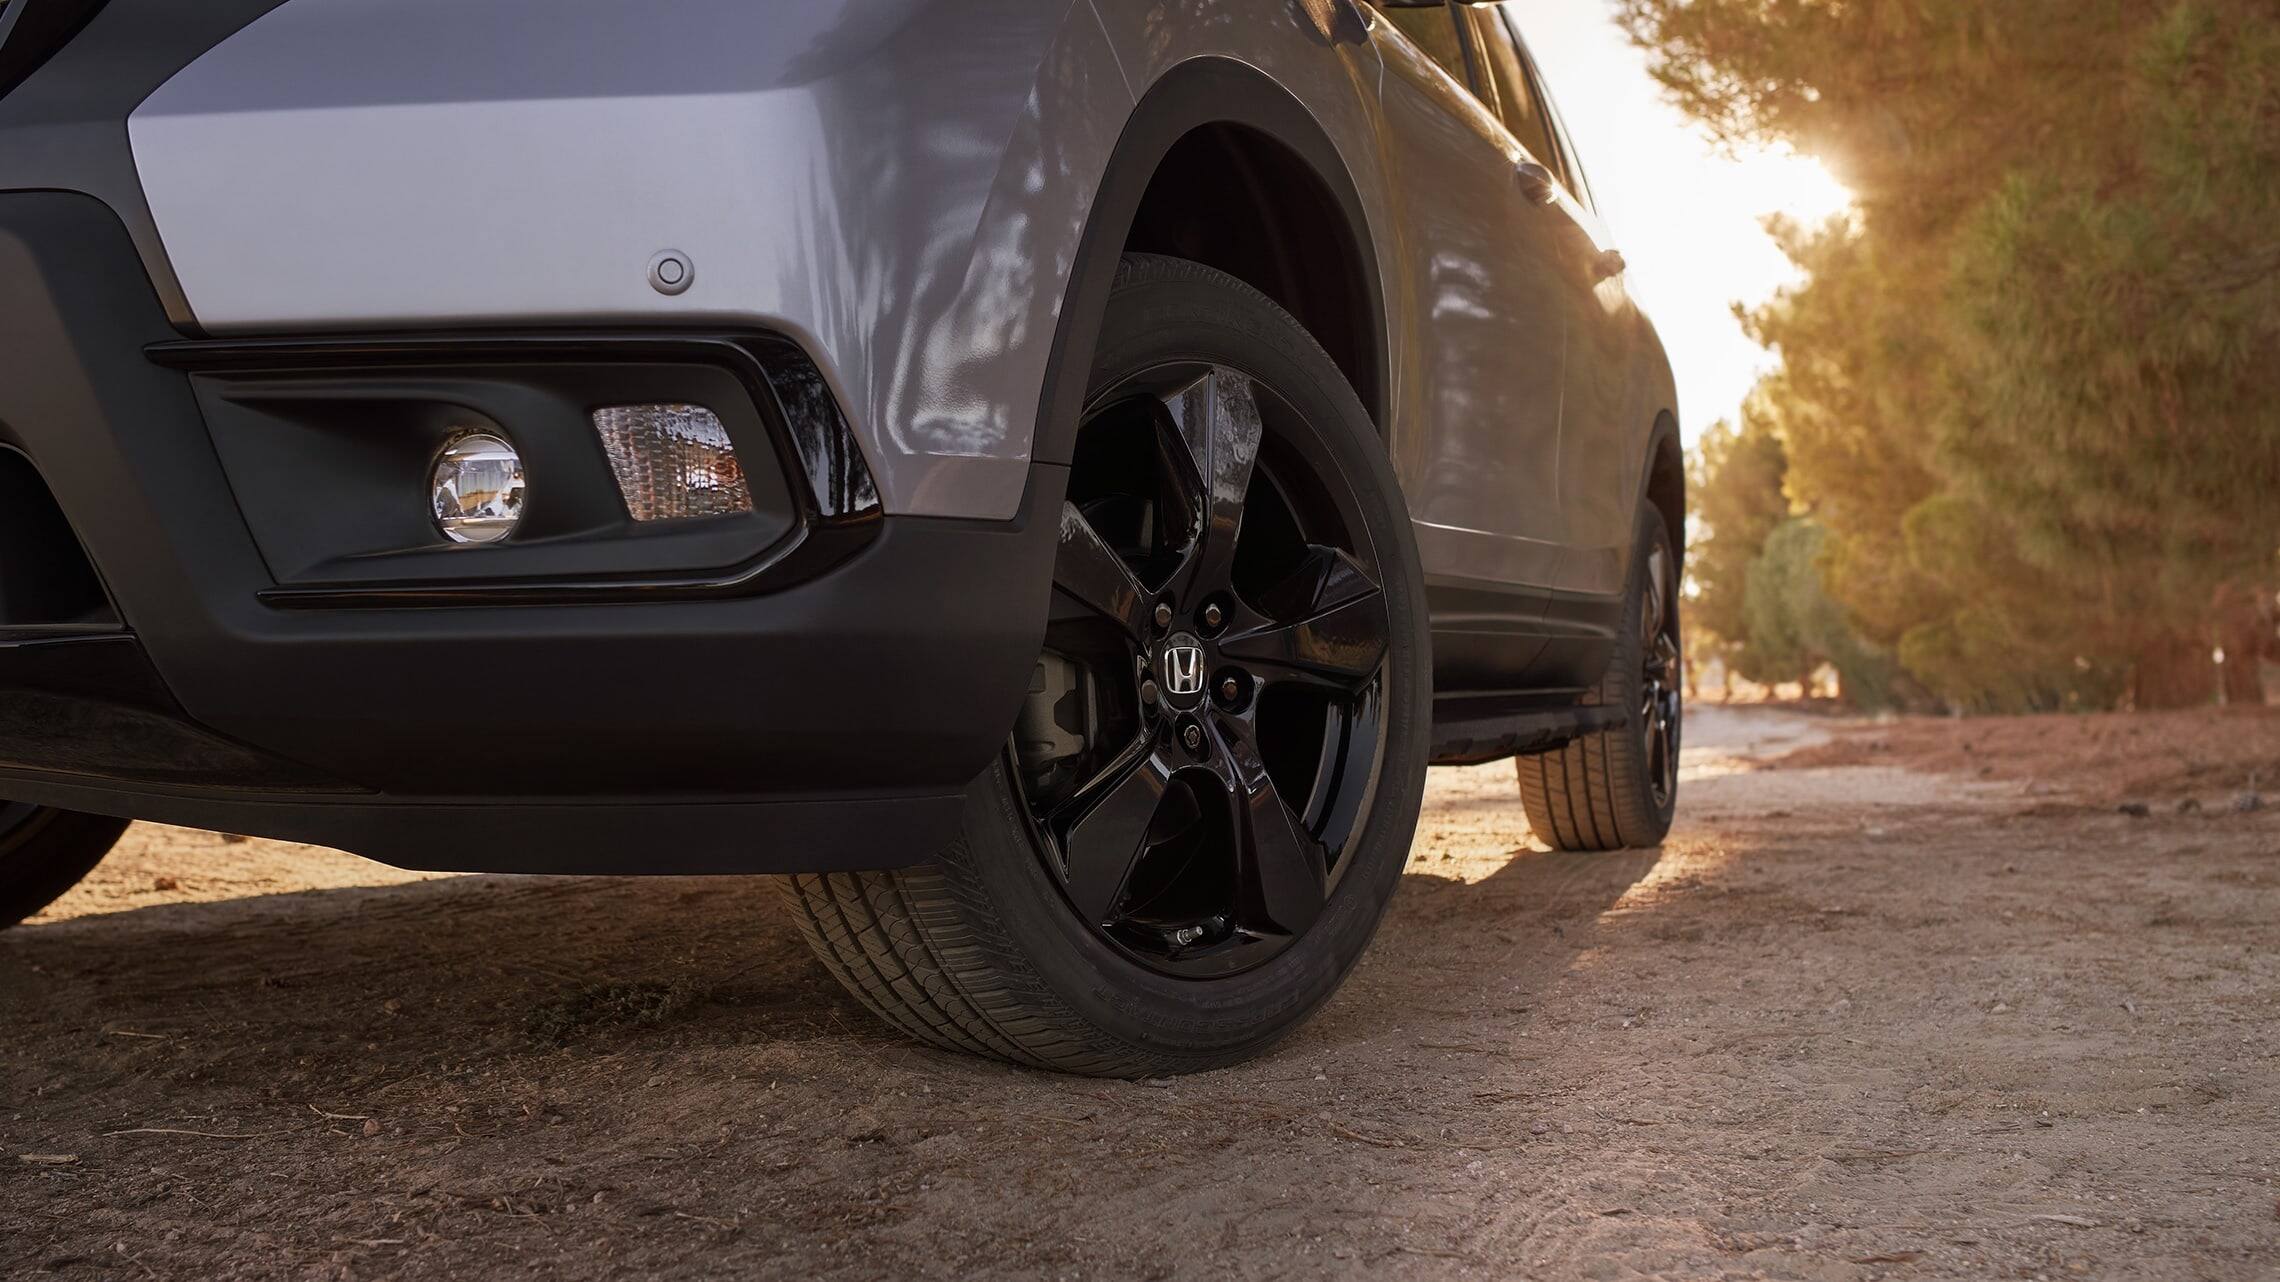 20-inch black alloy wheels on the 2019 Honda Passport Elite, in Lunar Silver Metallic with Honda Genuine Accessories, driving on a rugged road.